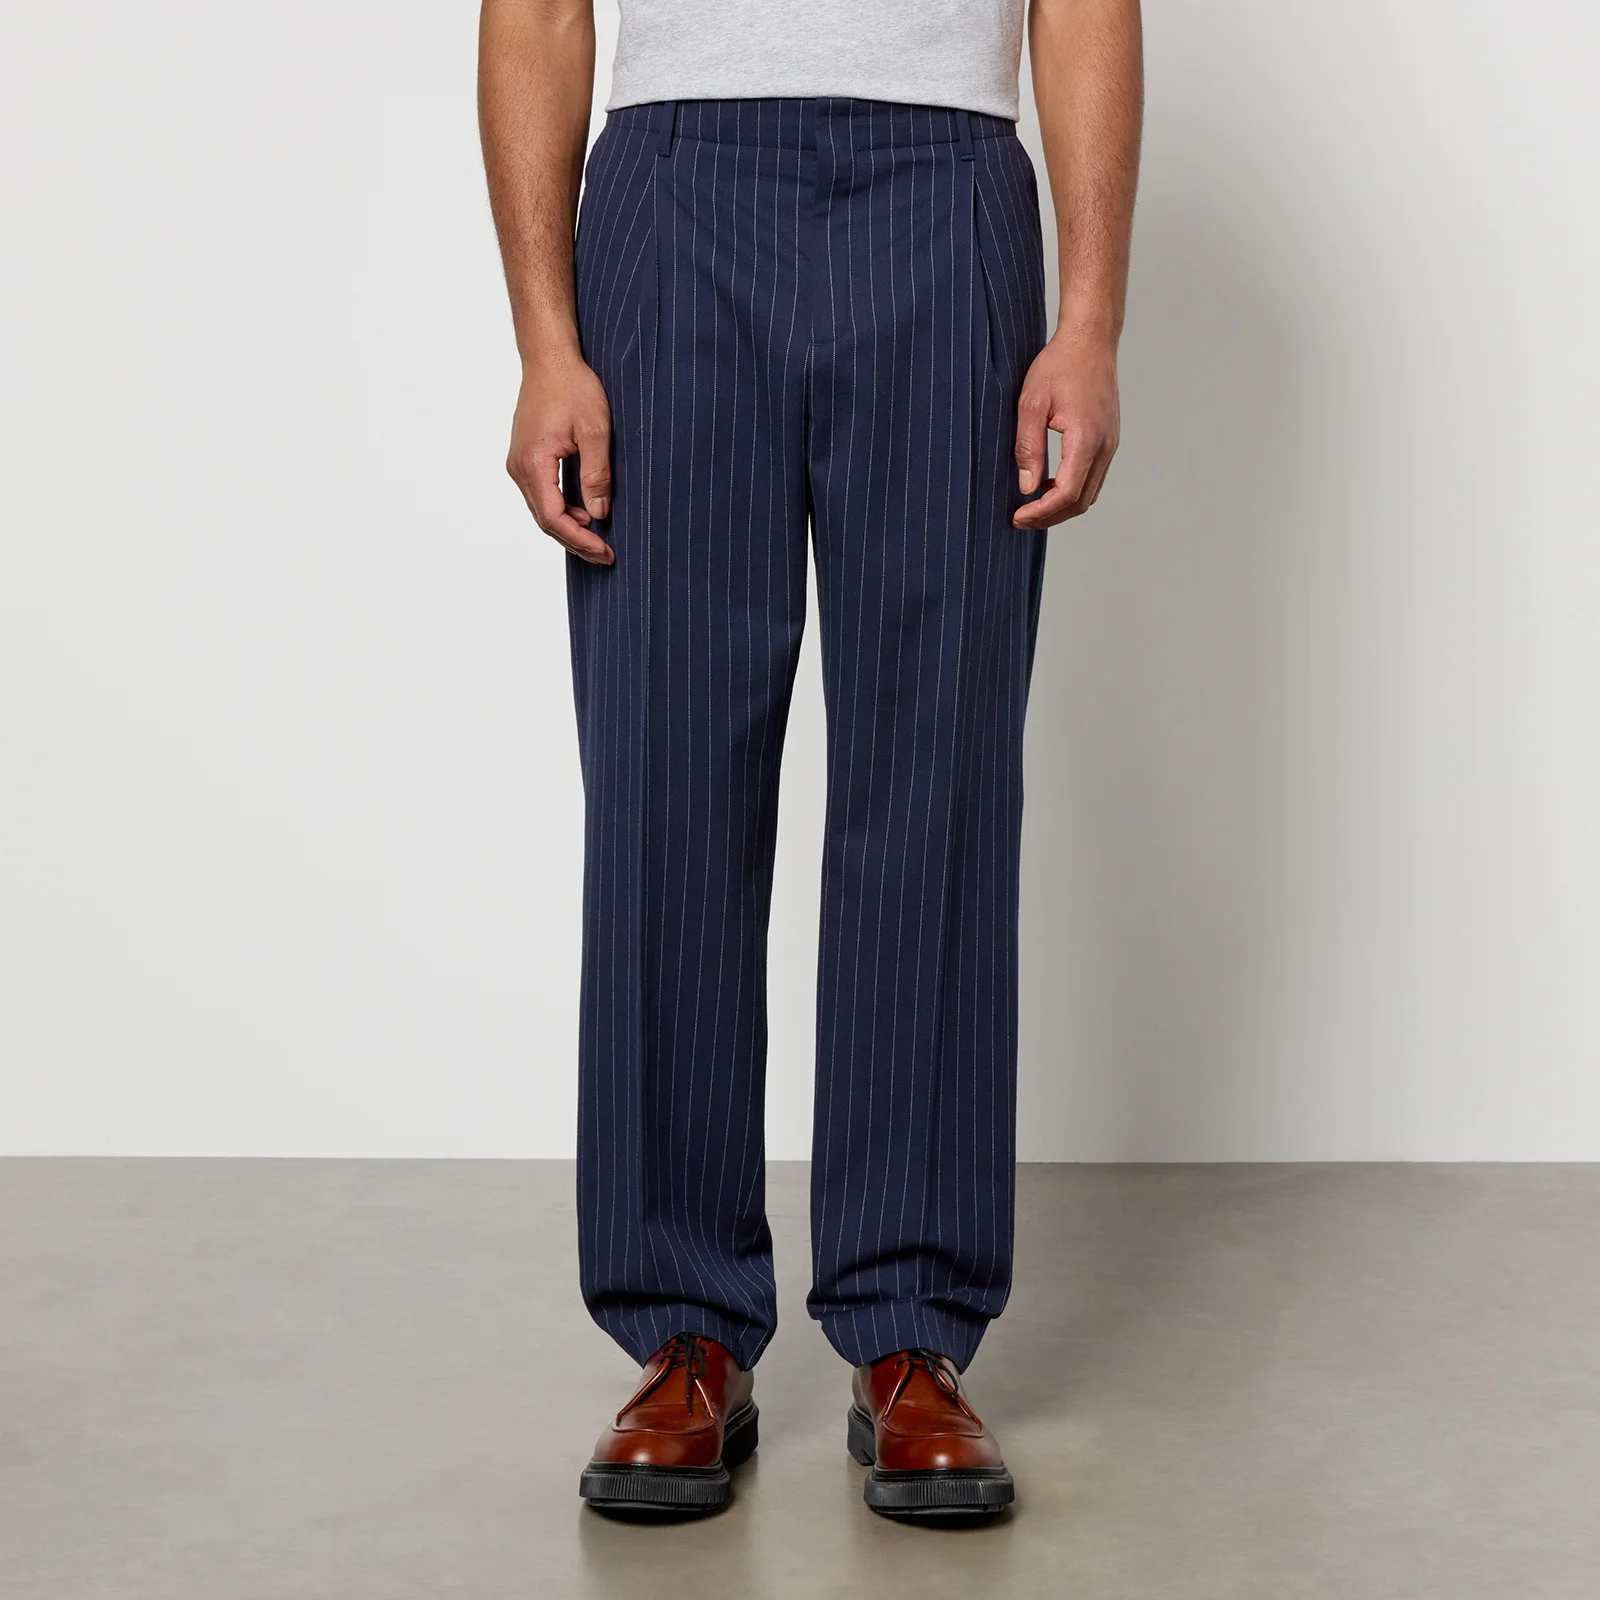 Maison Kitsuné Pinstriped Cotton and Wool-Blend Trousers Image 1